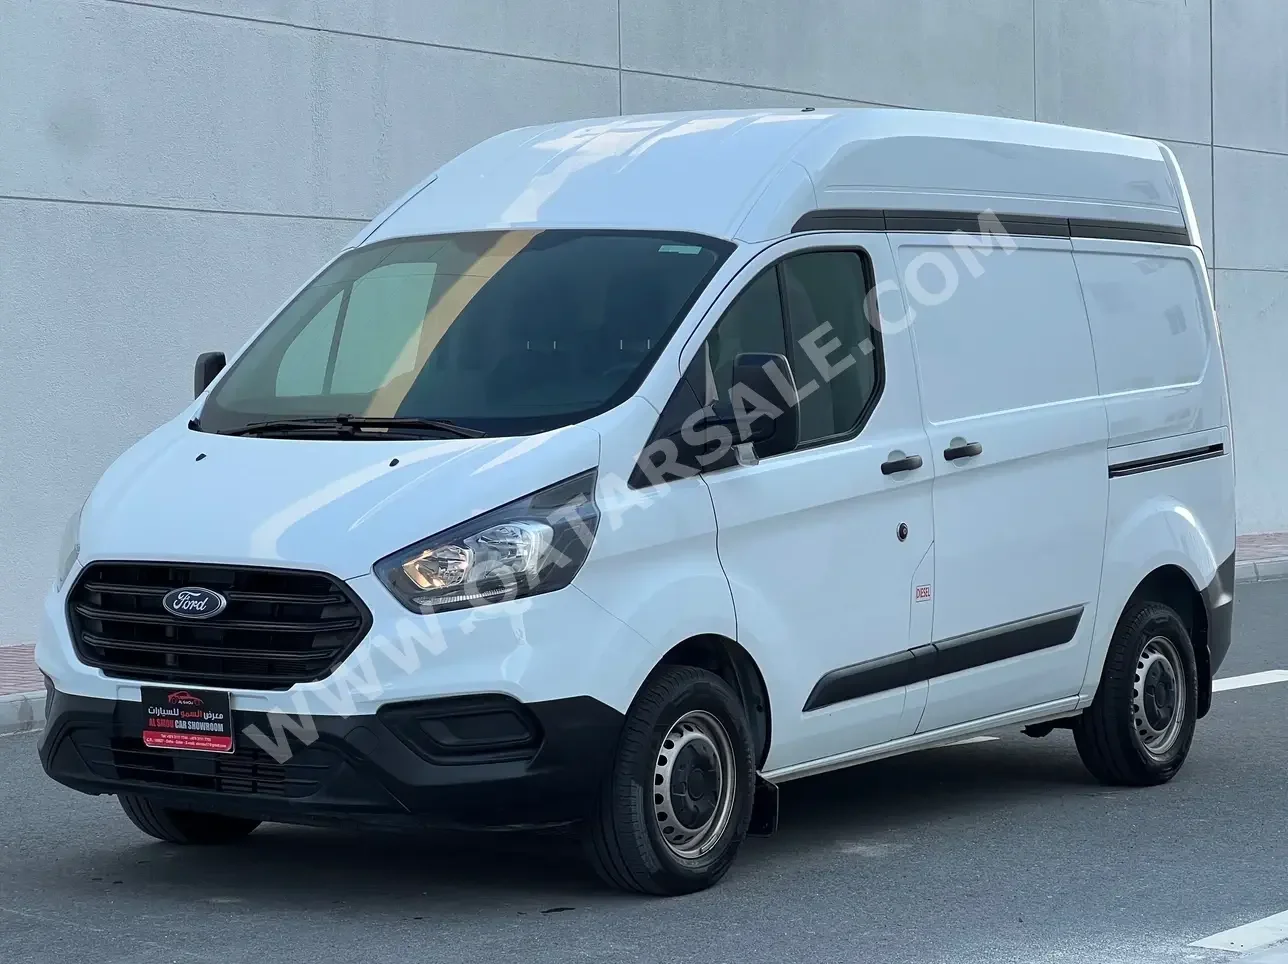 Ford  Transit  2022  Manual  20,000 Km  4 Cylinder  Front Wheel Drive (FWD)  Van / Bus  White  With Warranty